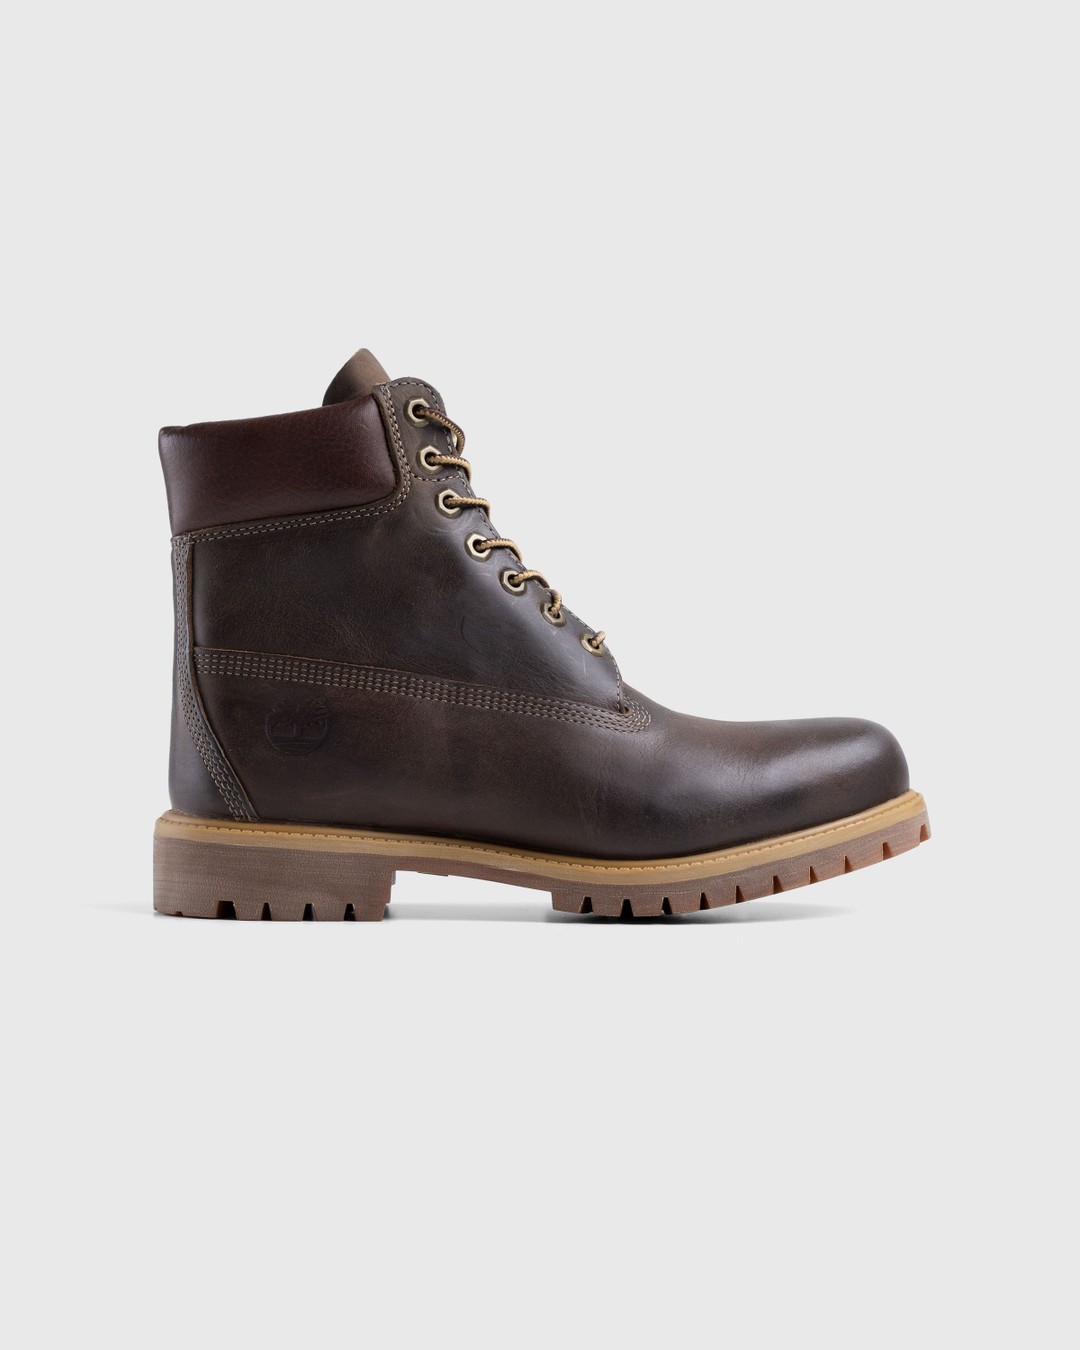 Timberland – Heritage 6 in Premium Brown - Boots - Brown - Image 1